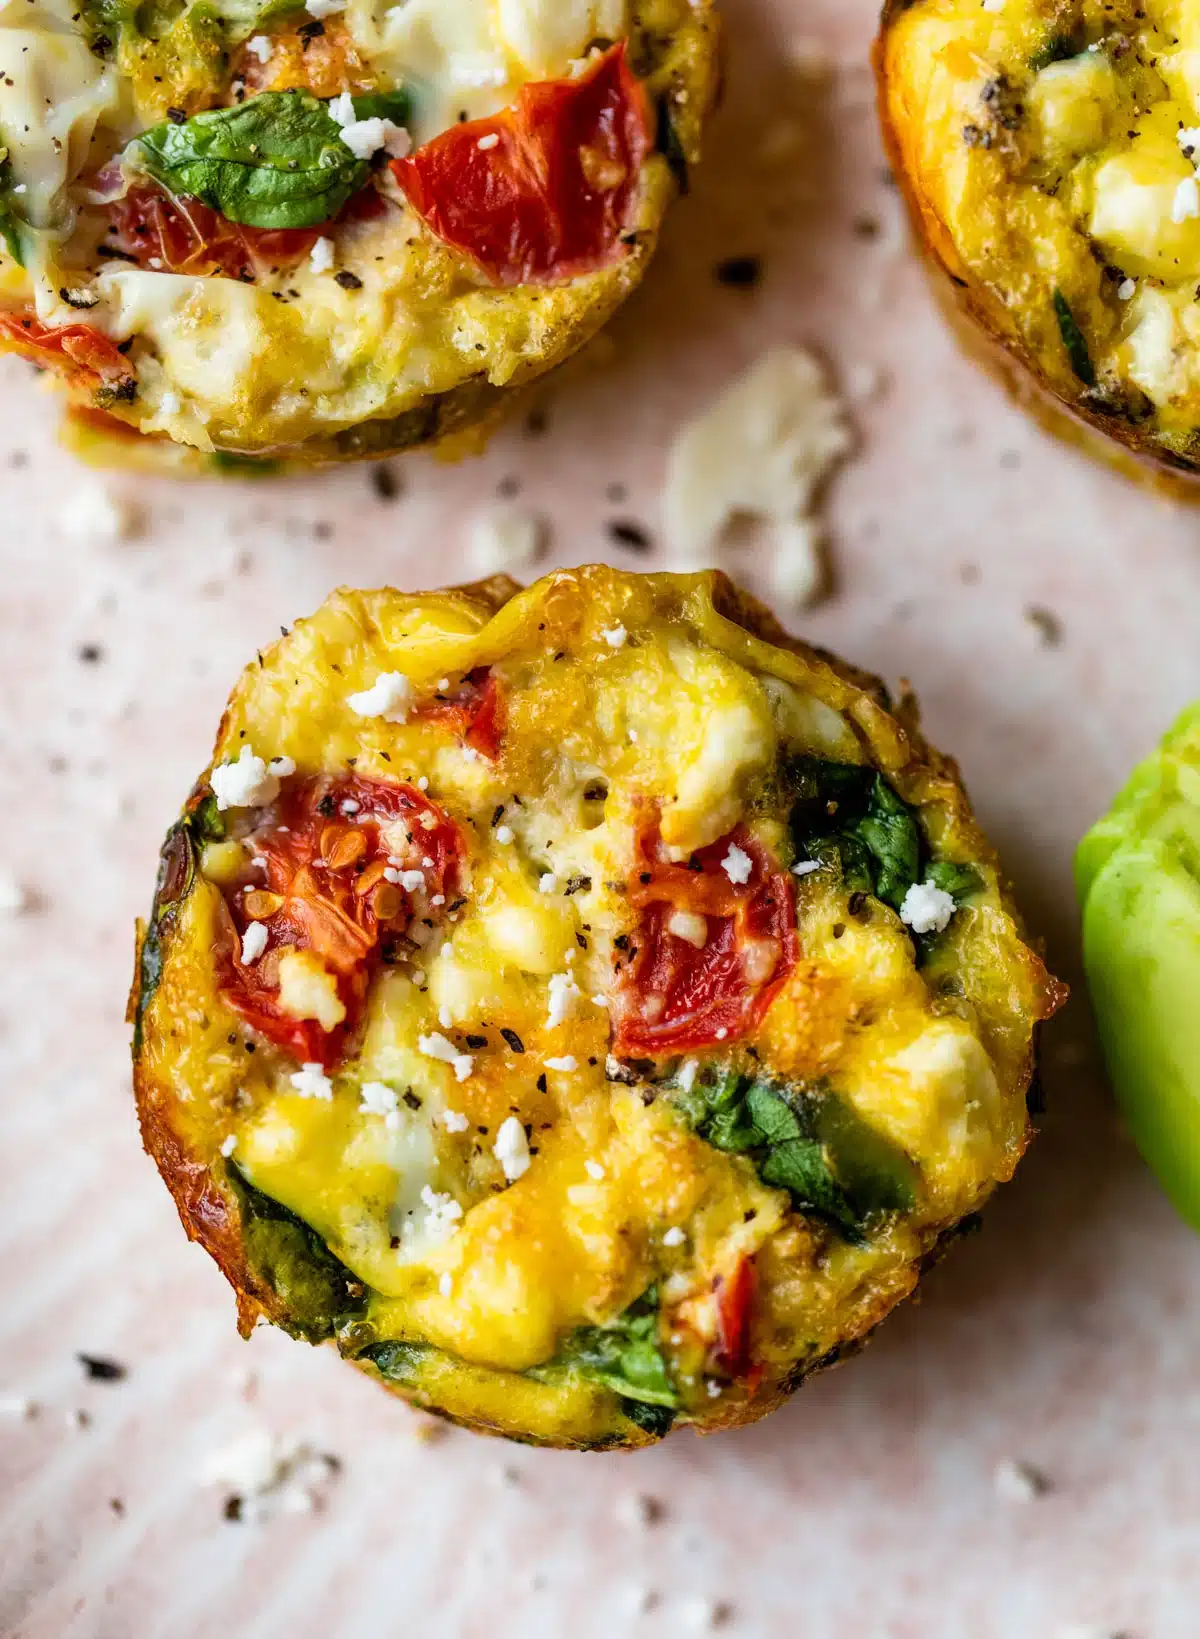 A close-up reveals vibrant, colorful egg muffins containing spinach, tomatoes, and cheese, perfectly baked.